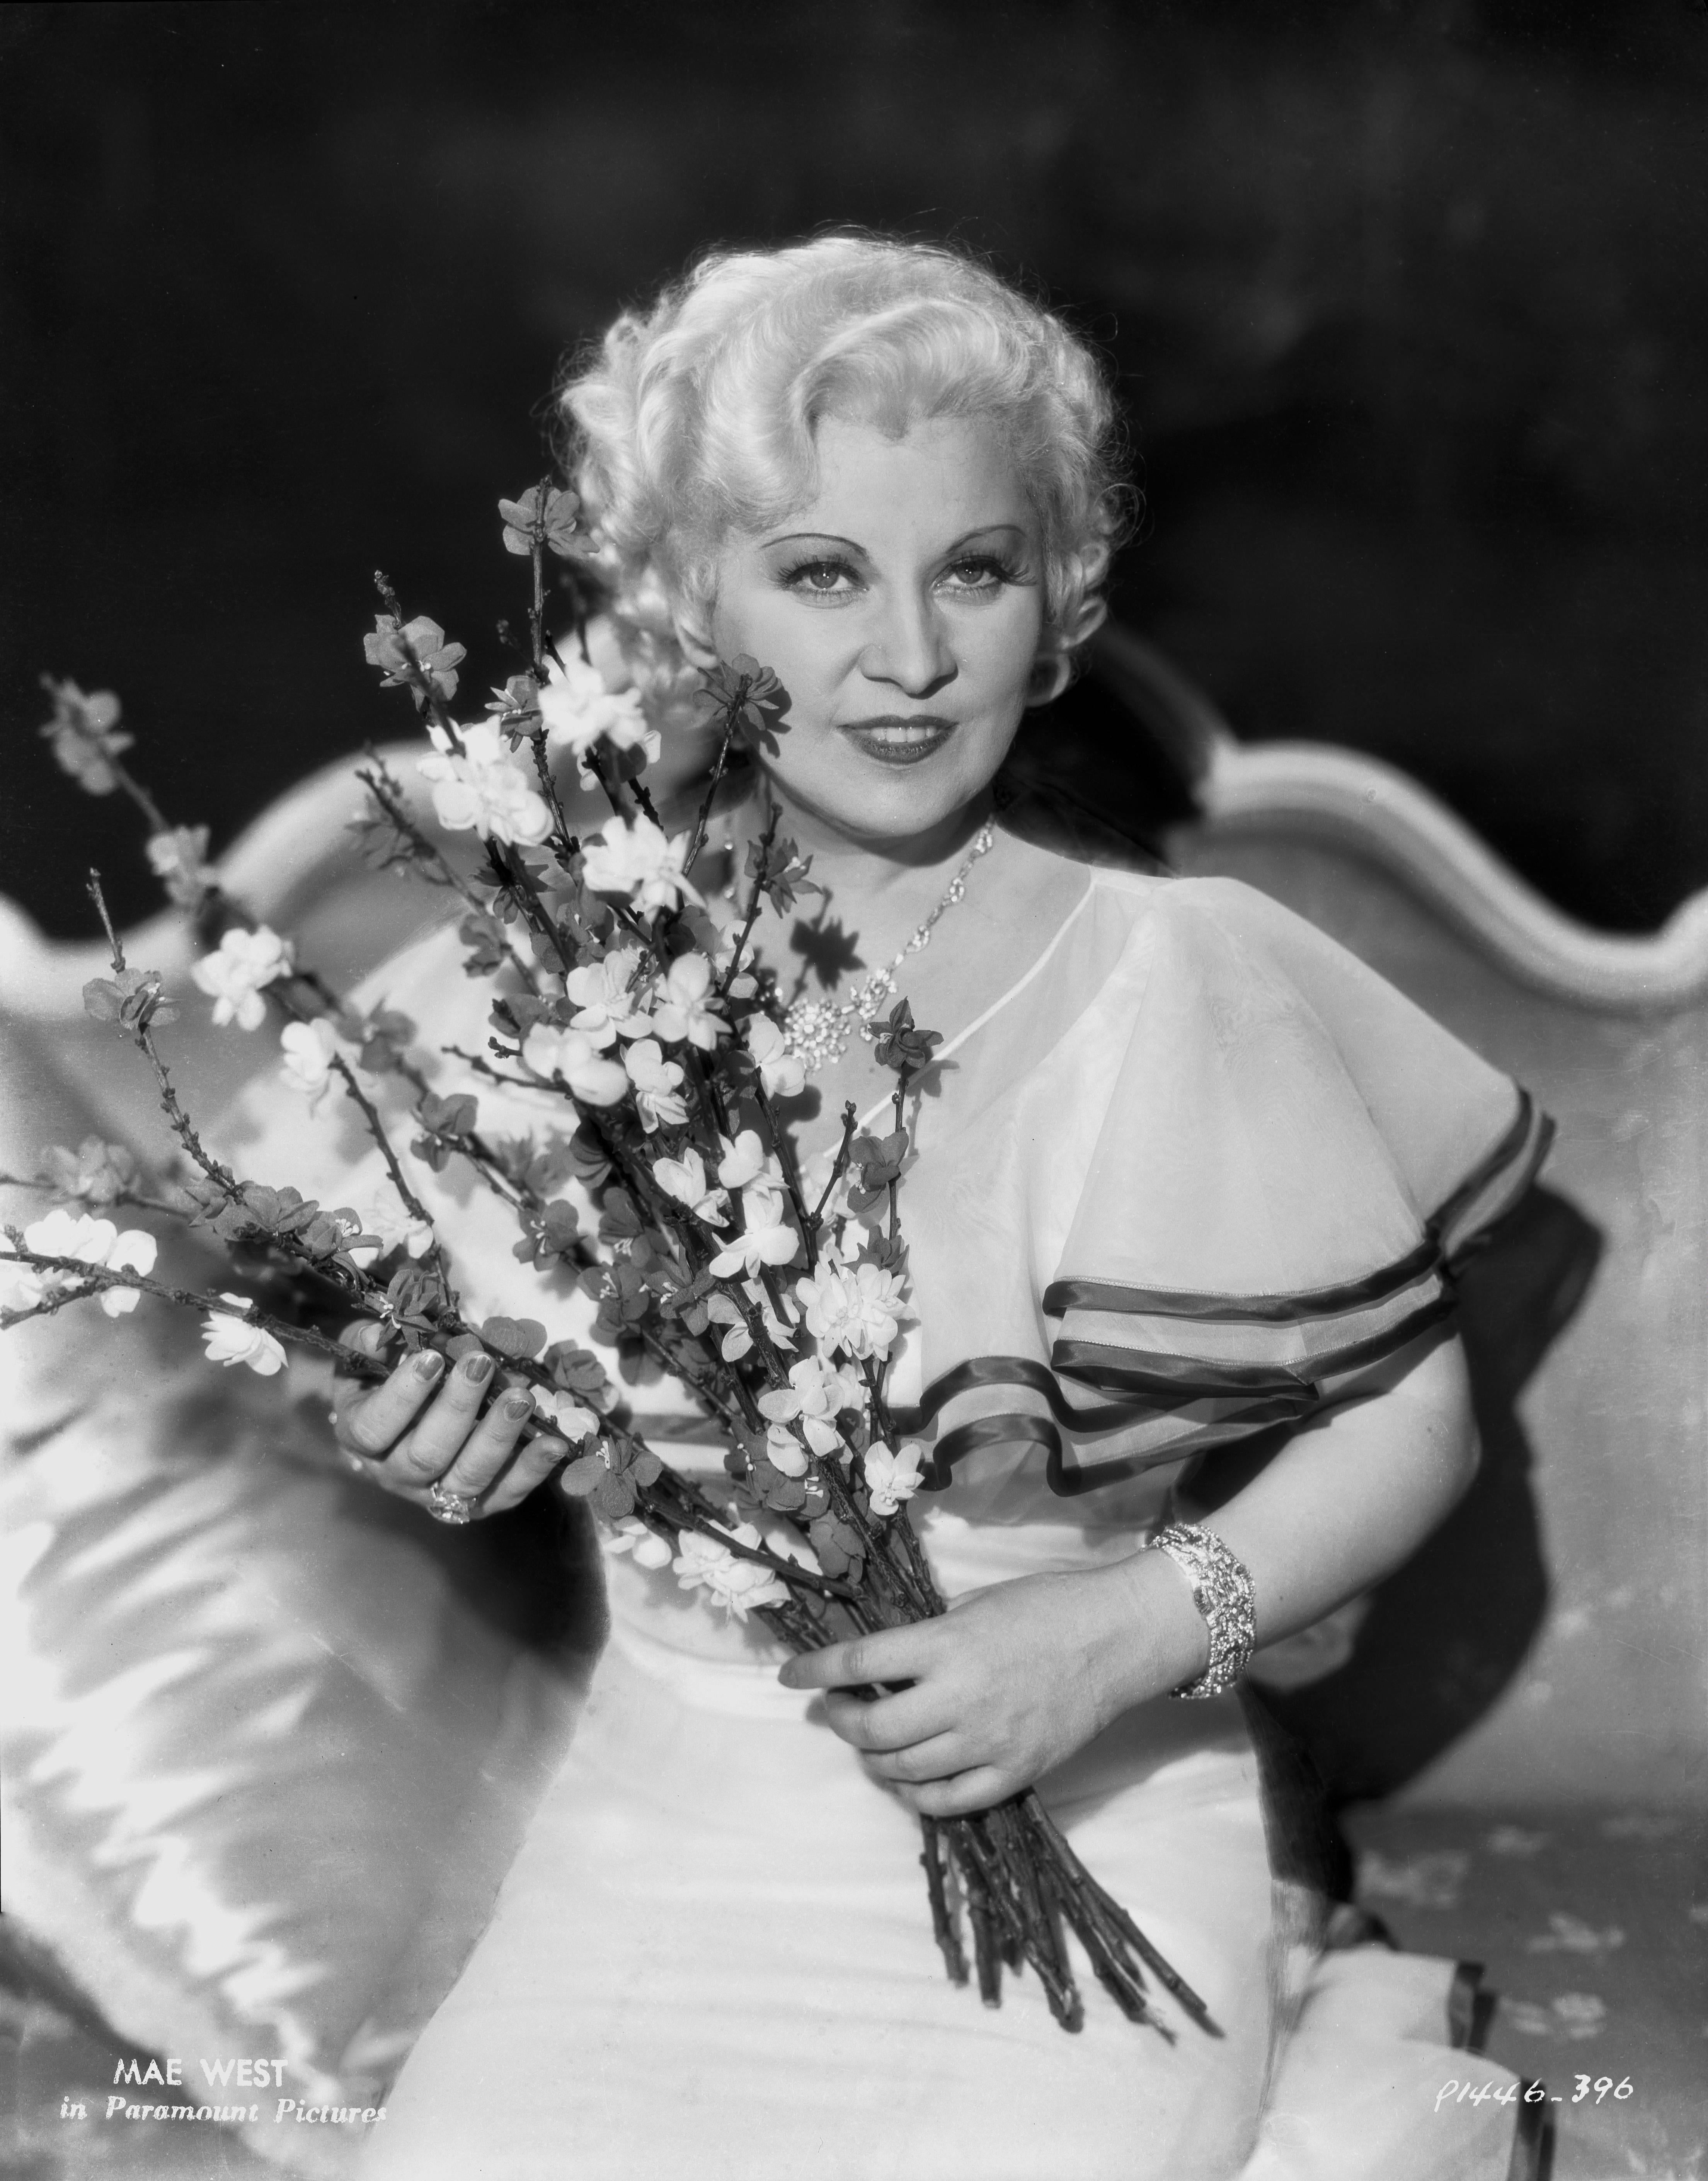 Unknown Portrait Photograph - Mae West with Flowers II Fine Art Print